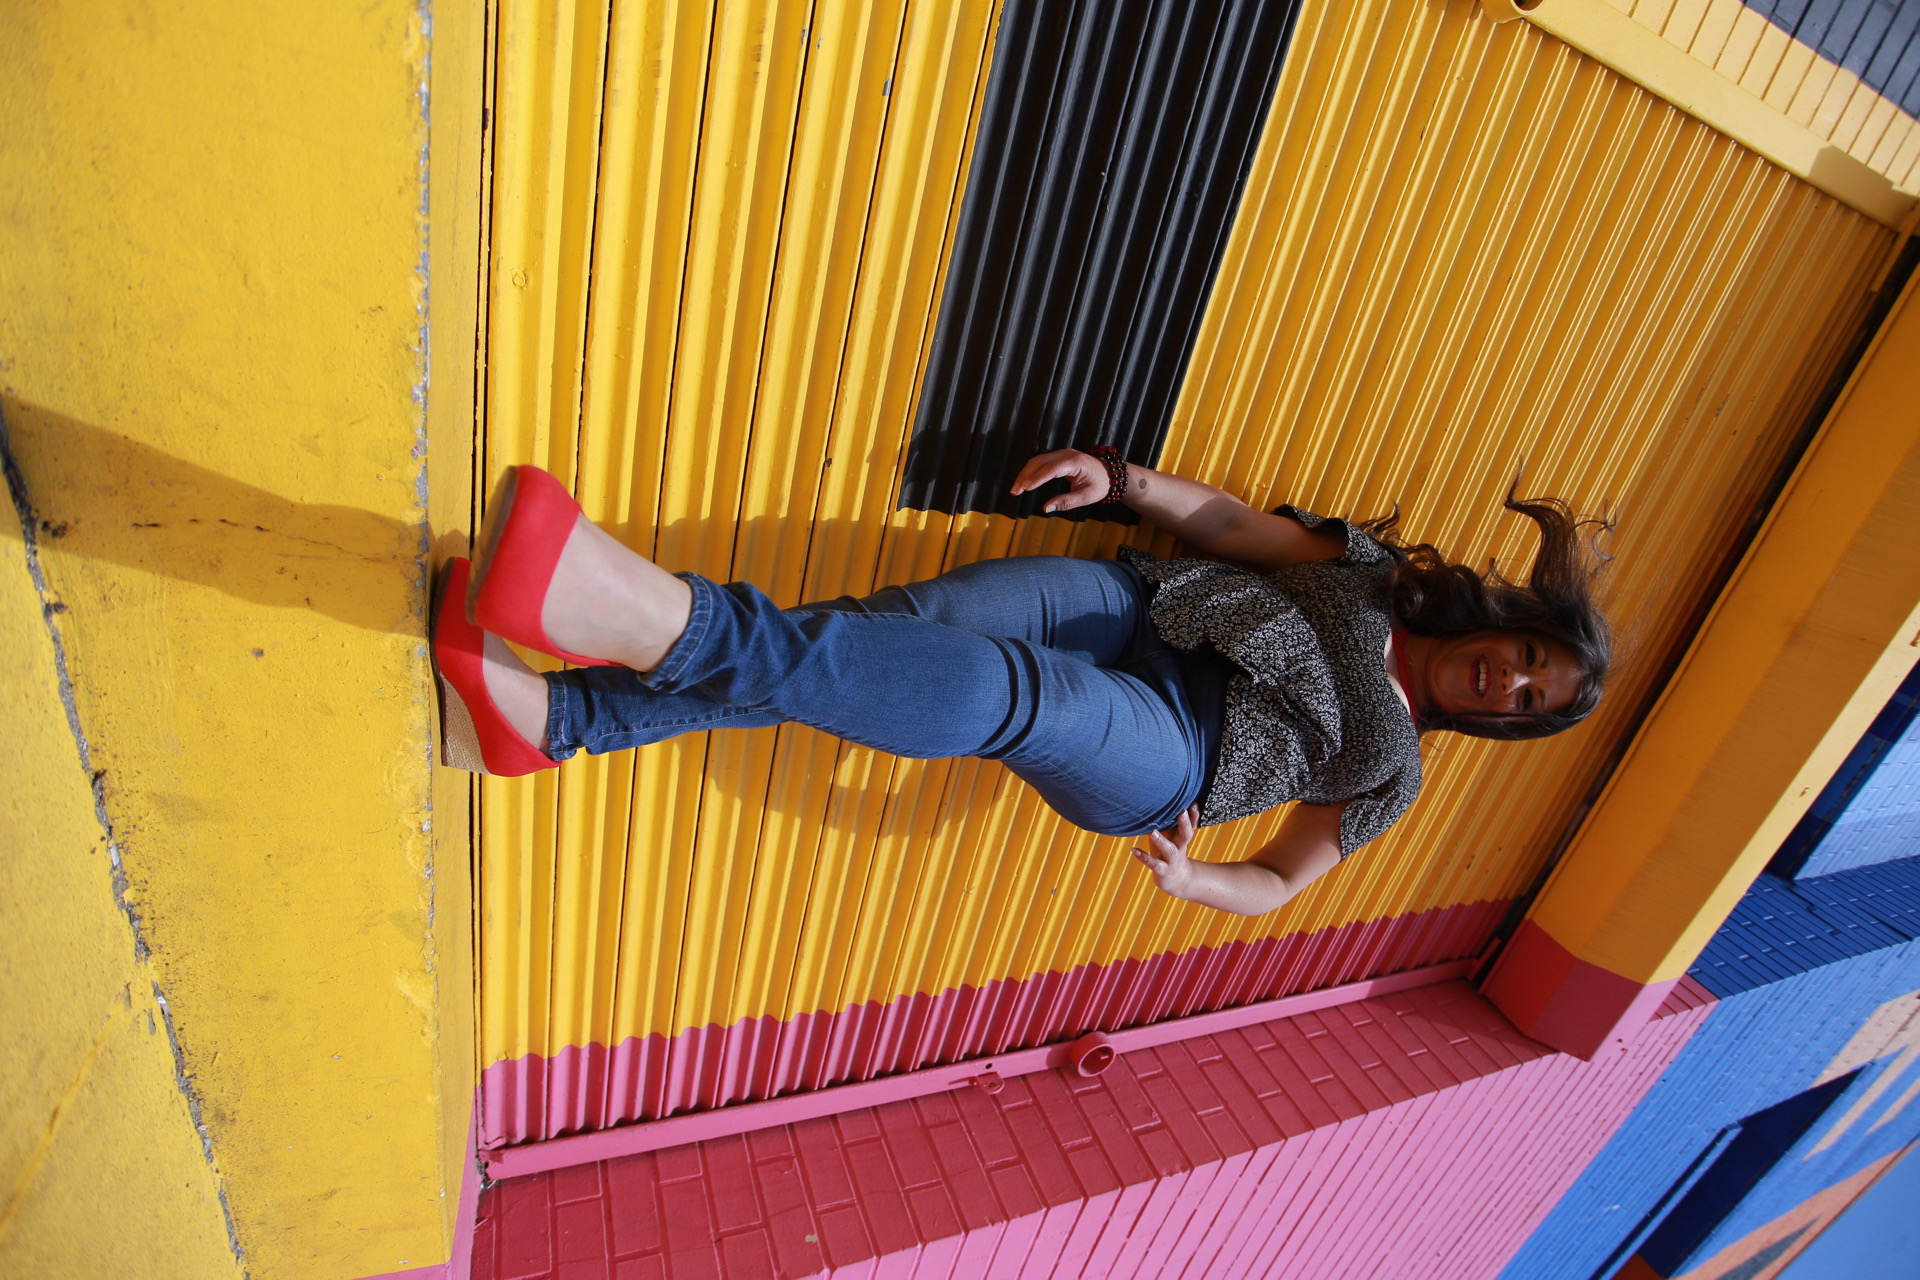 Wendie Veloz standing on a yellow curb with a colorful wall behind her wearing jeans and red shoes